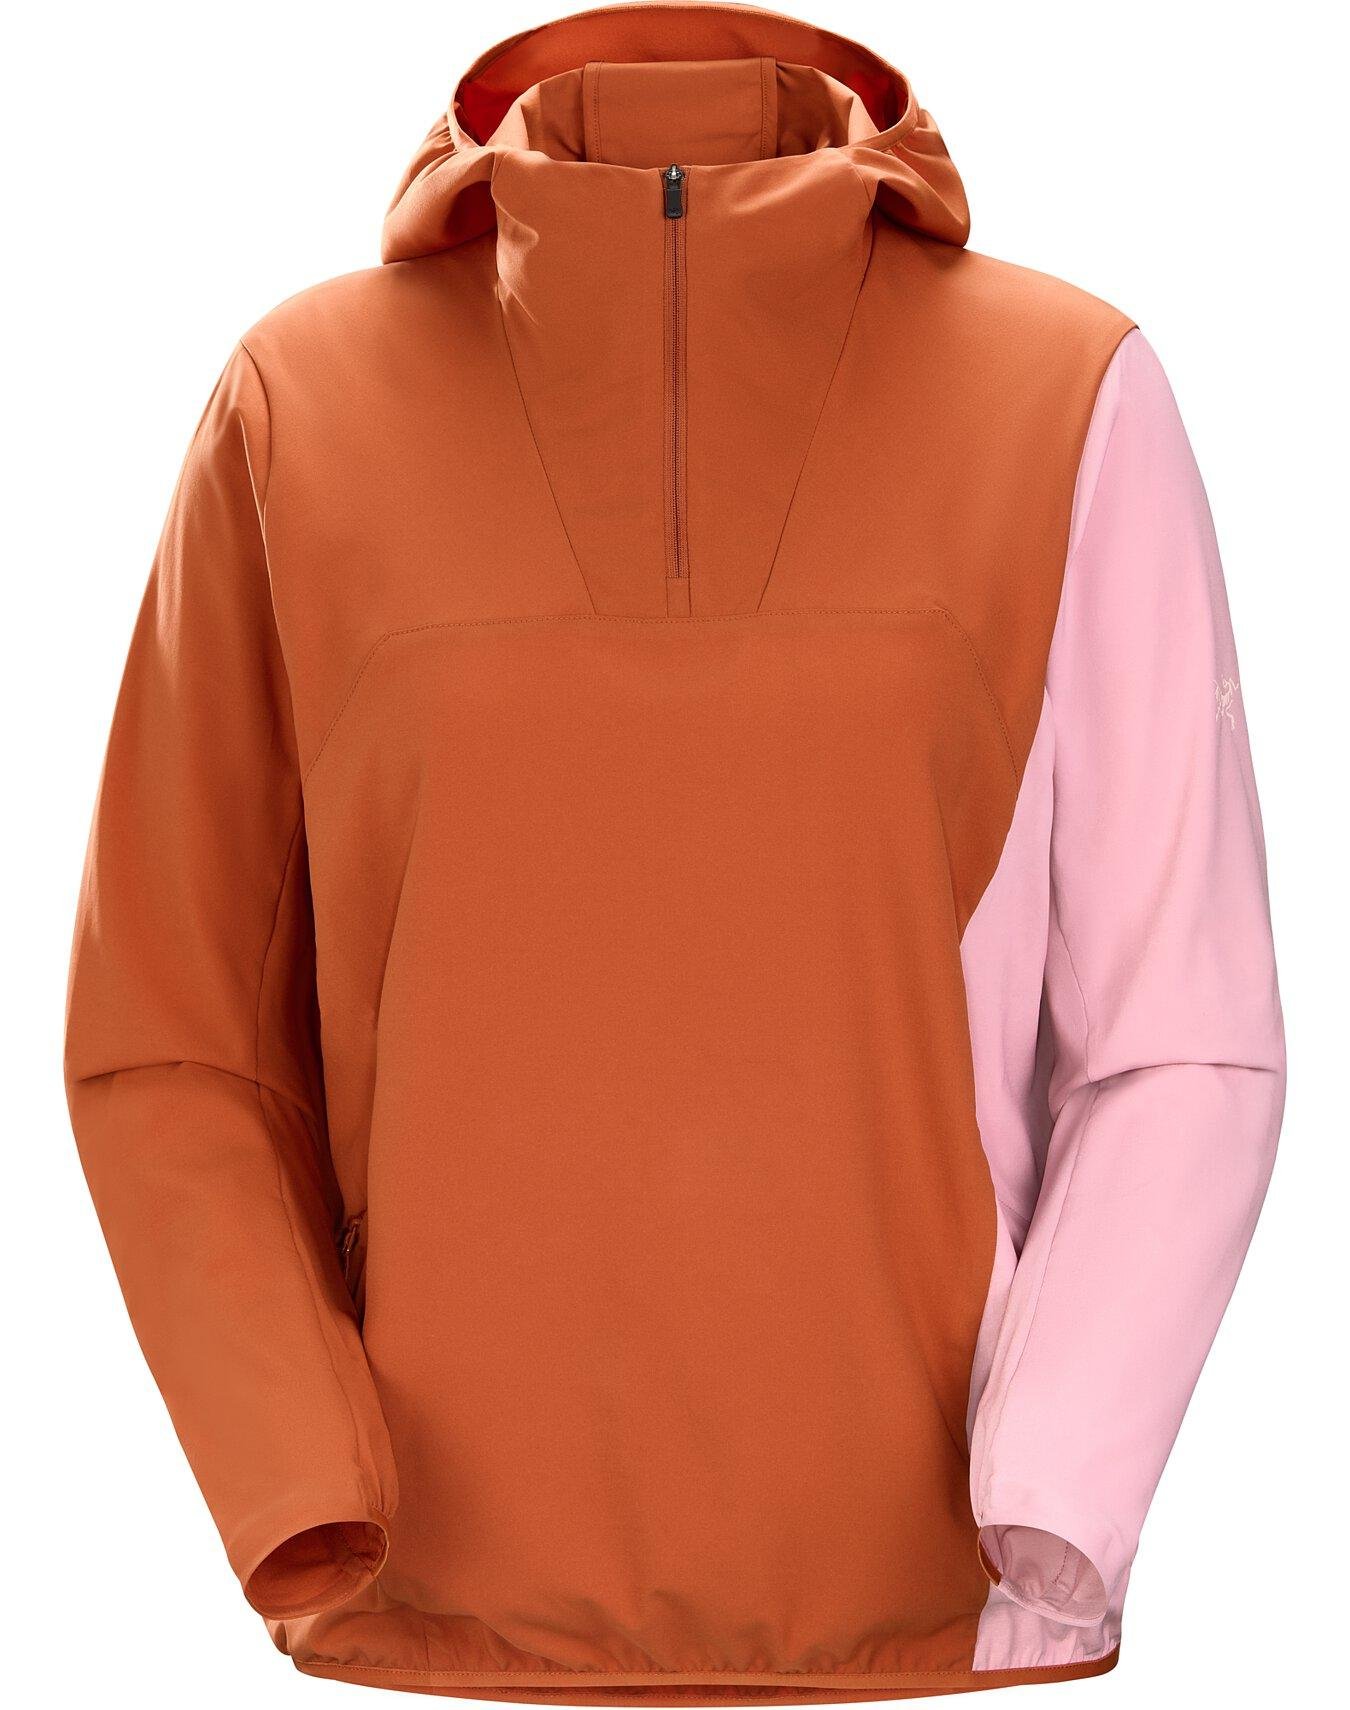 Sima Pullover Women's by ARC'TERYX